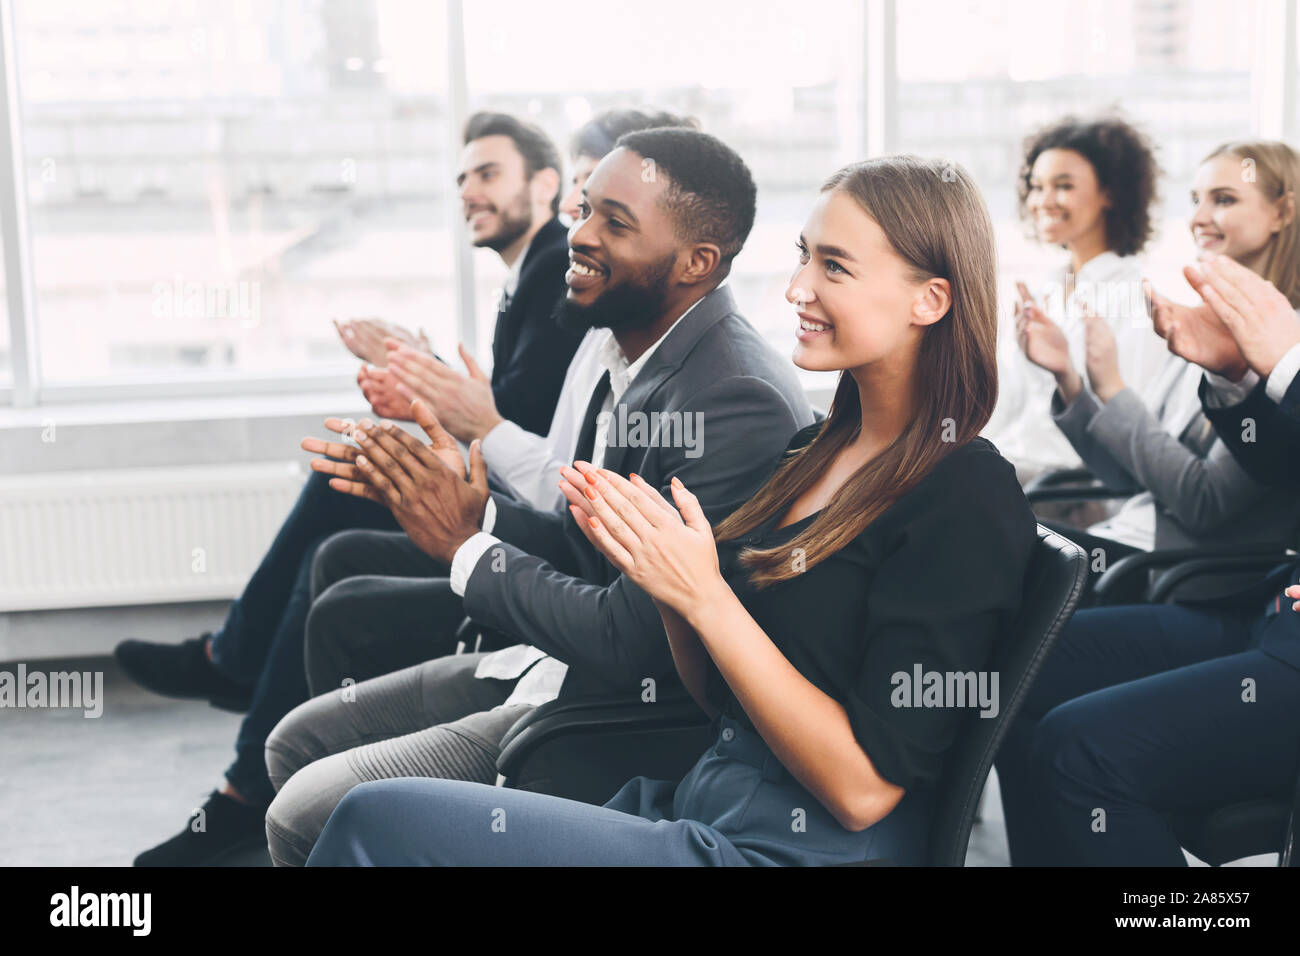 Diverse business team greeting speaker with applause Stock Photo